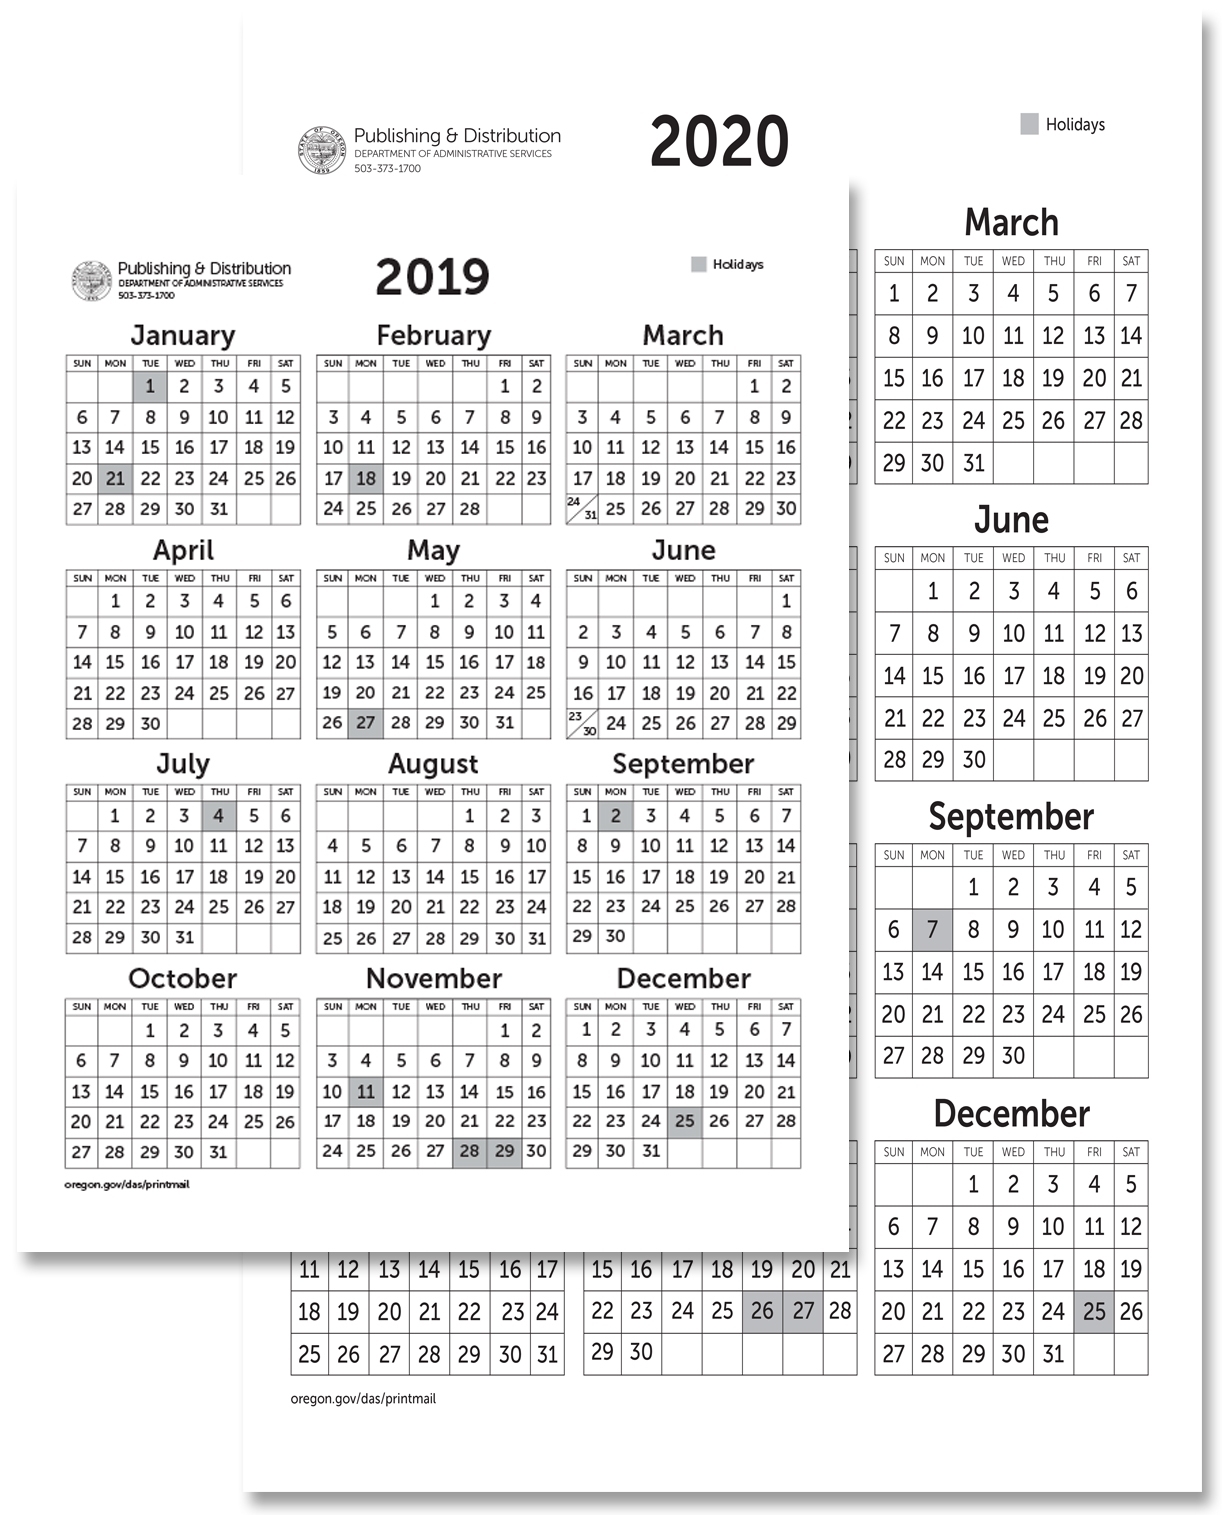 State Of Oregon: Printing, Mailing And Distribution Services - Calendars intended for 2020 Calendar 8.5 X 11